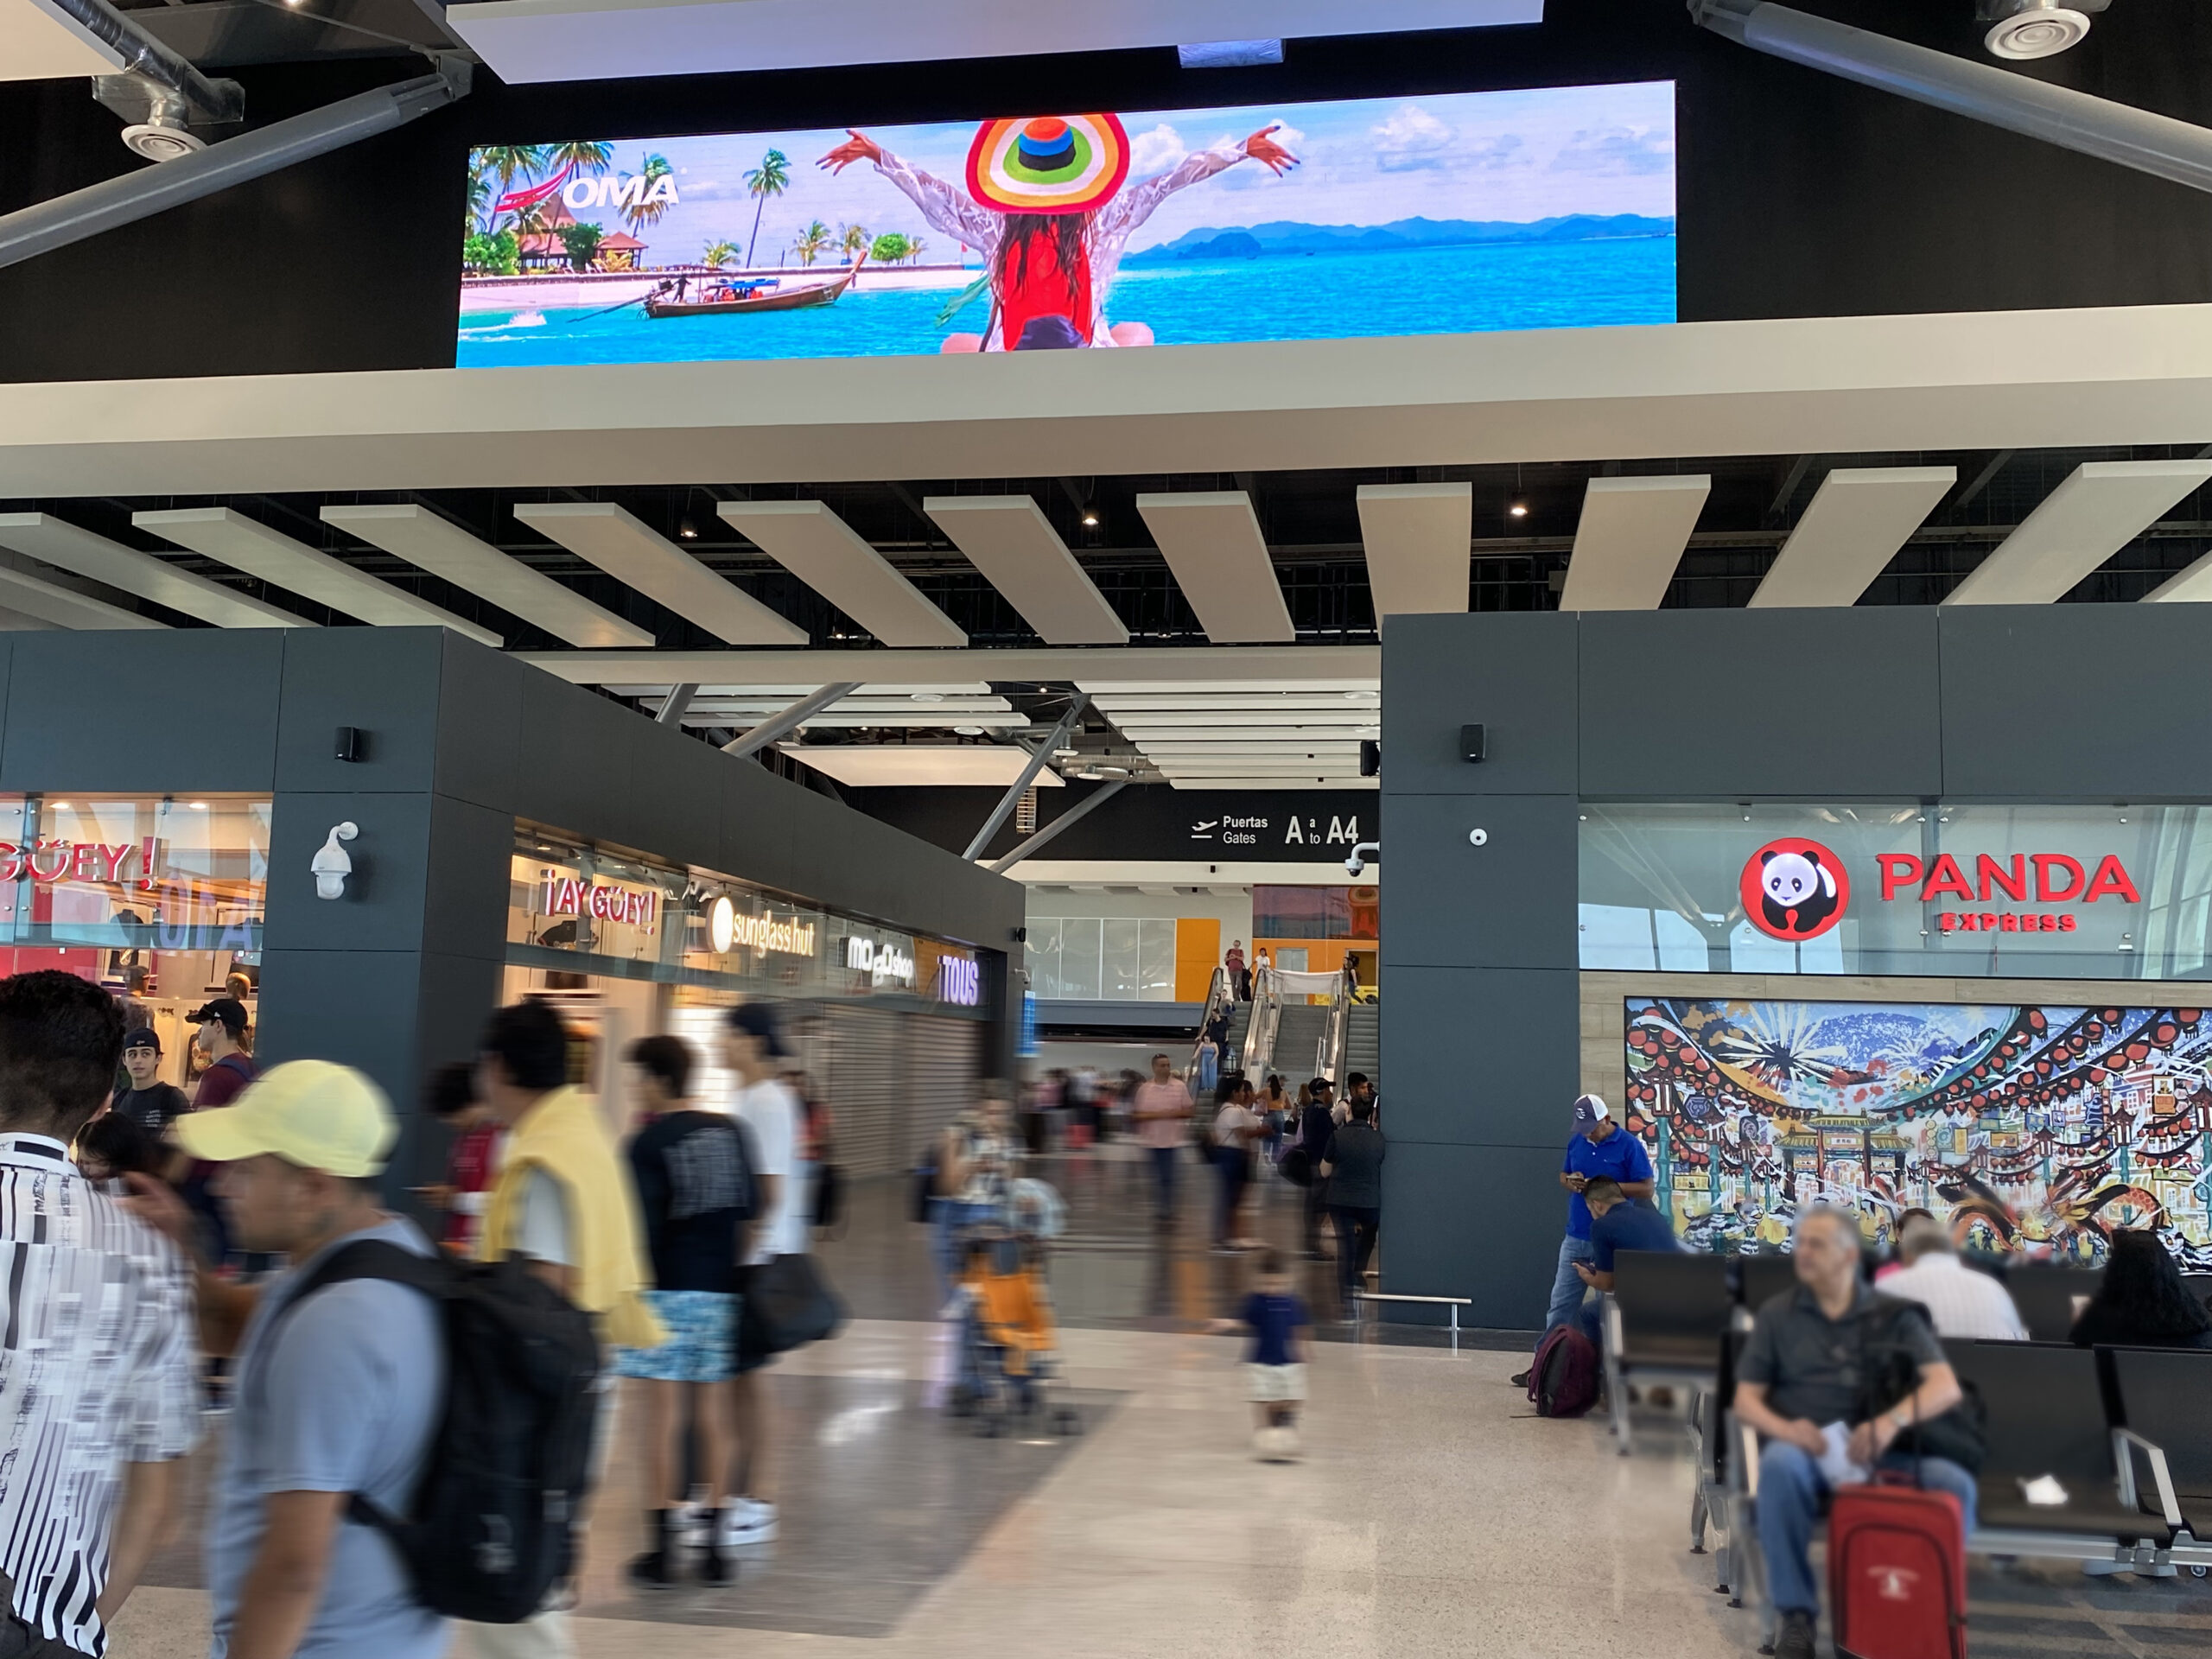 dvLED video wall Monterrey Airport